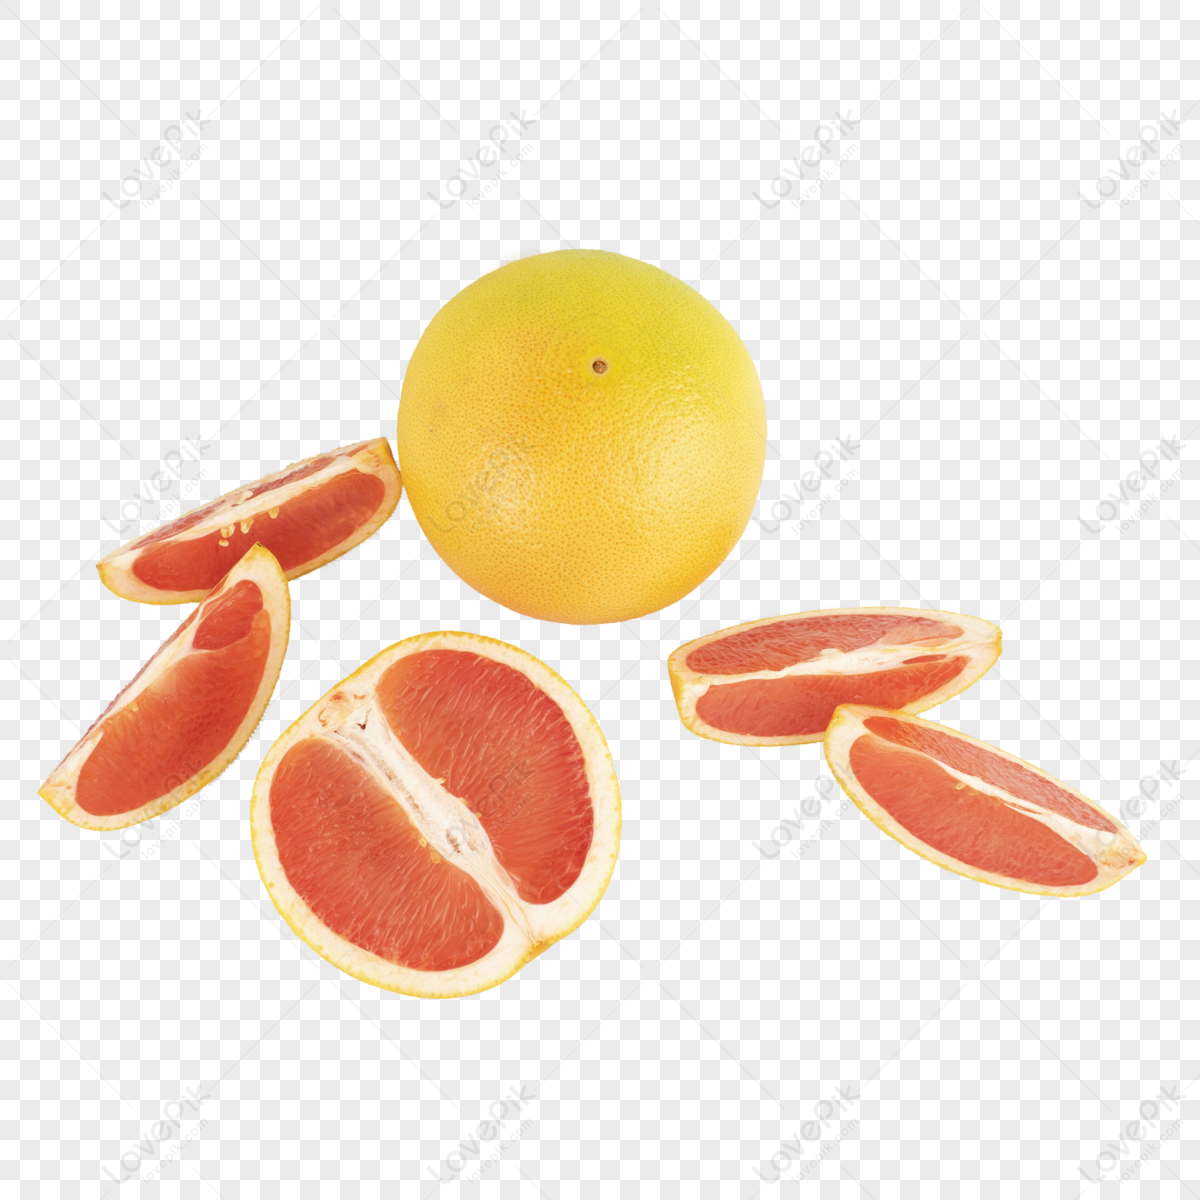 Fruit Slices PNG Images With Transparent Background